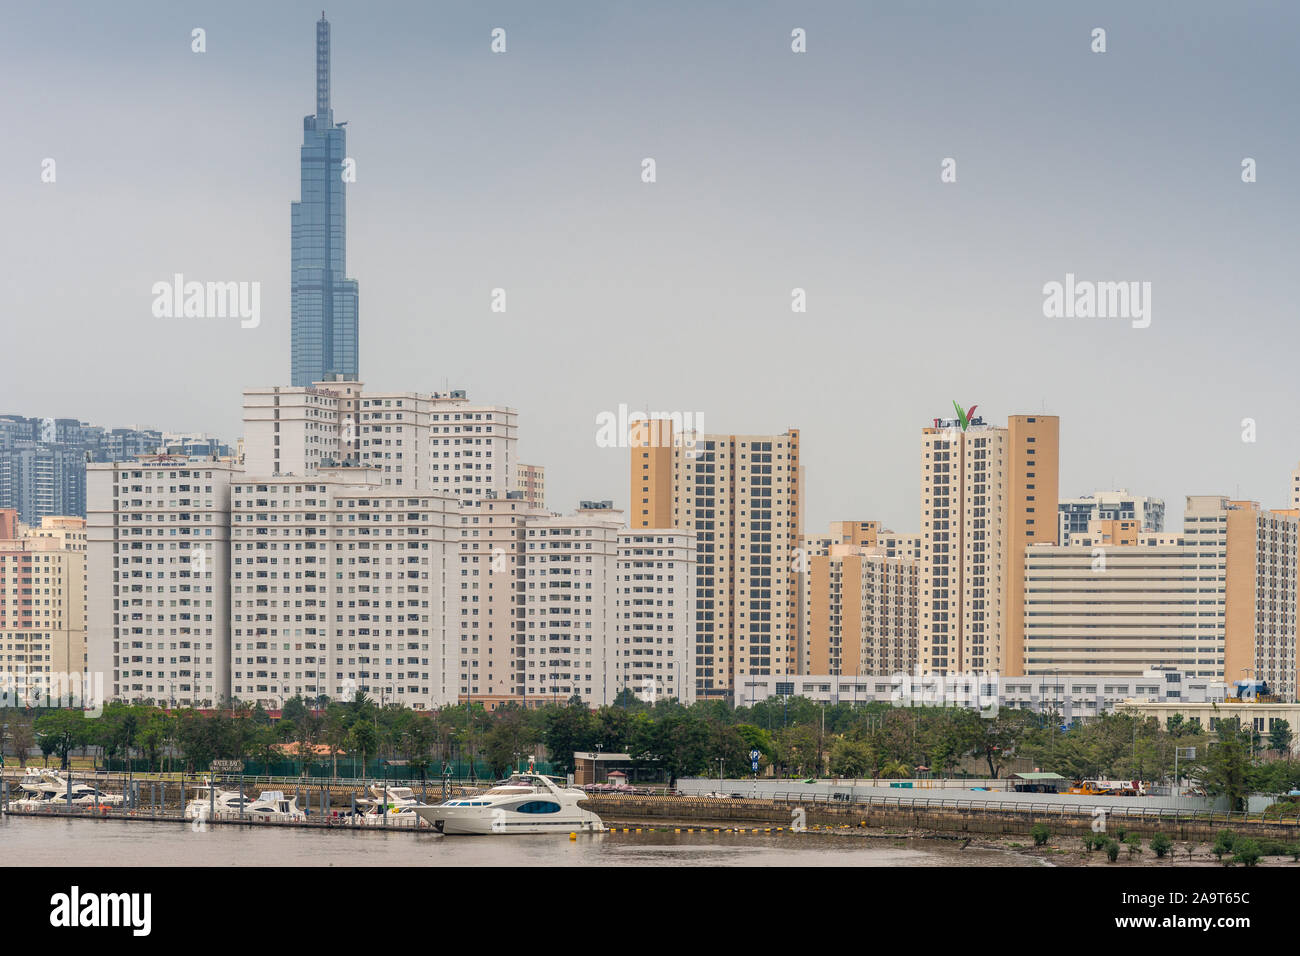 Ho Chi Minh City Vietnam - March 12, 2019: Song Sai Gon river. Royal Yacht Club with upscale motor boats in front of collection of apartment towers in Stock Photo